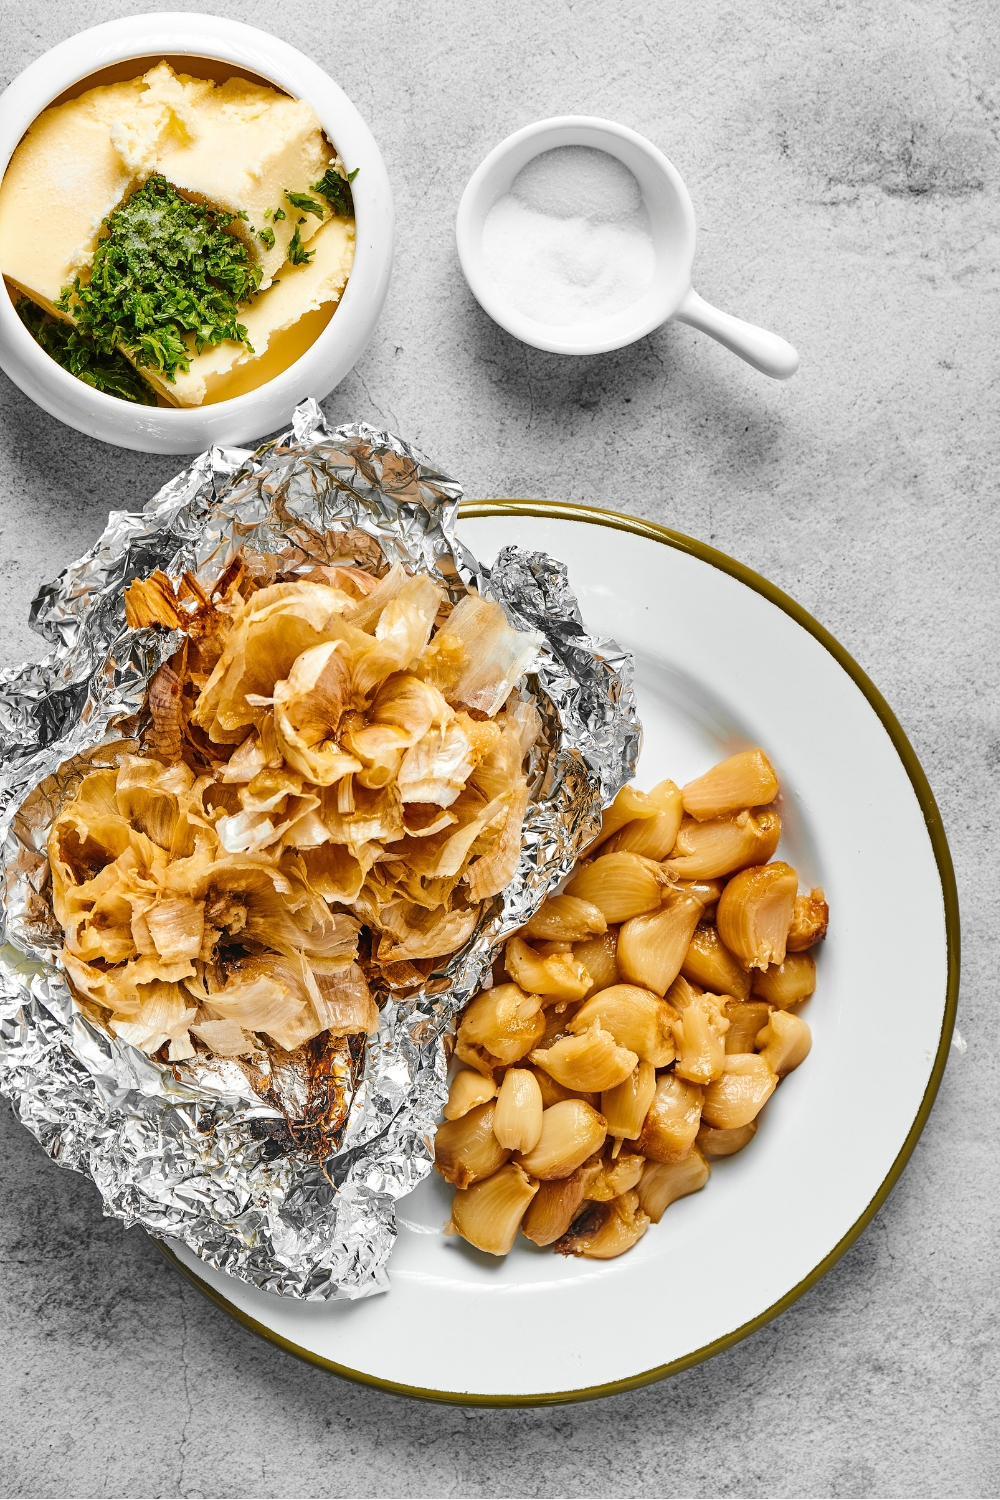 A plate with a bunch of roasted garlic bulbs and aluminum foil with the garlic shells on it.